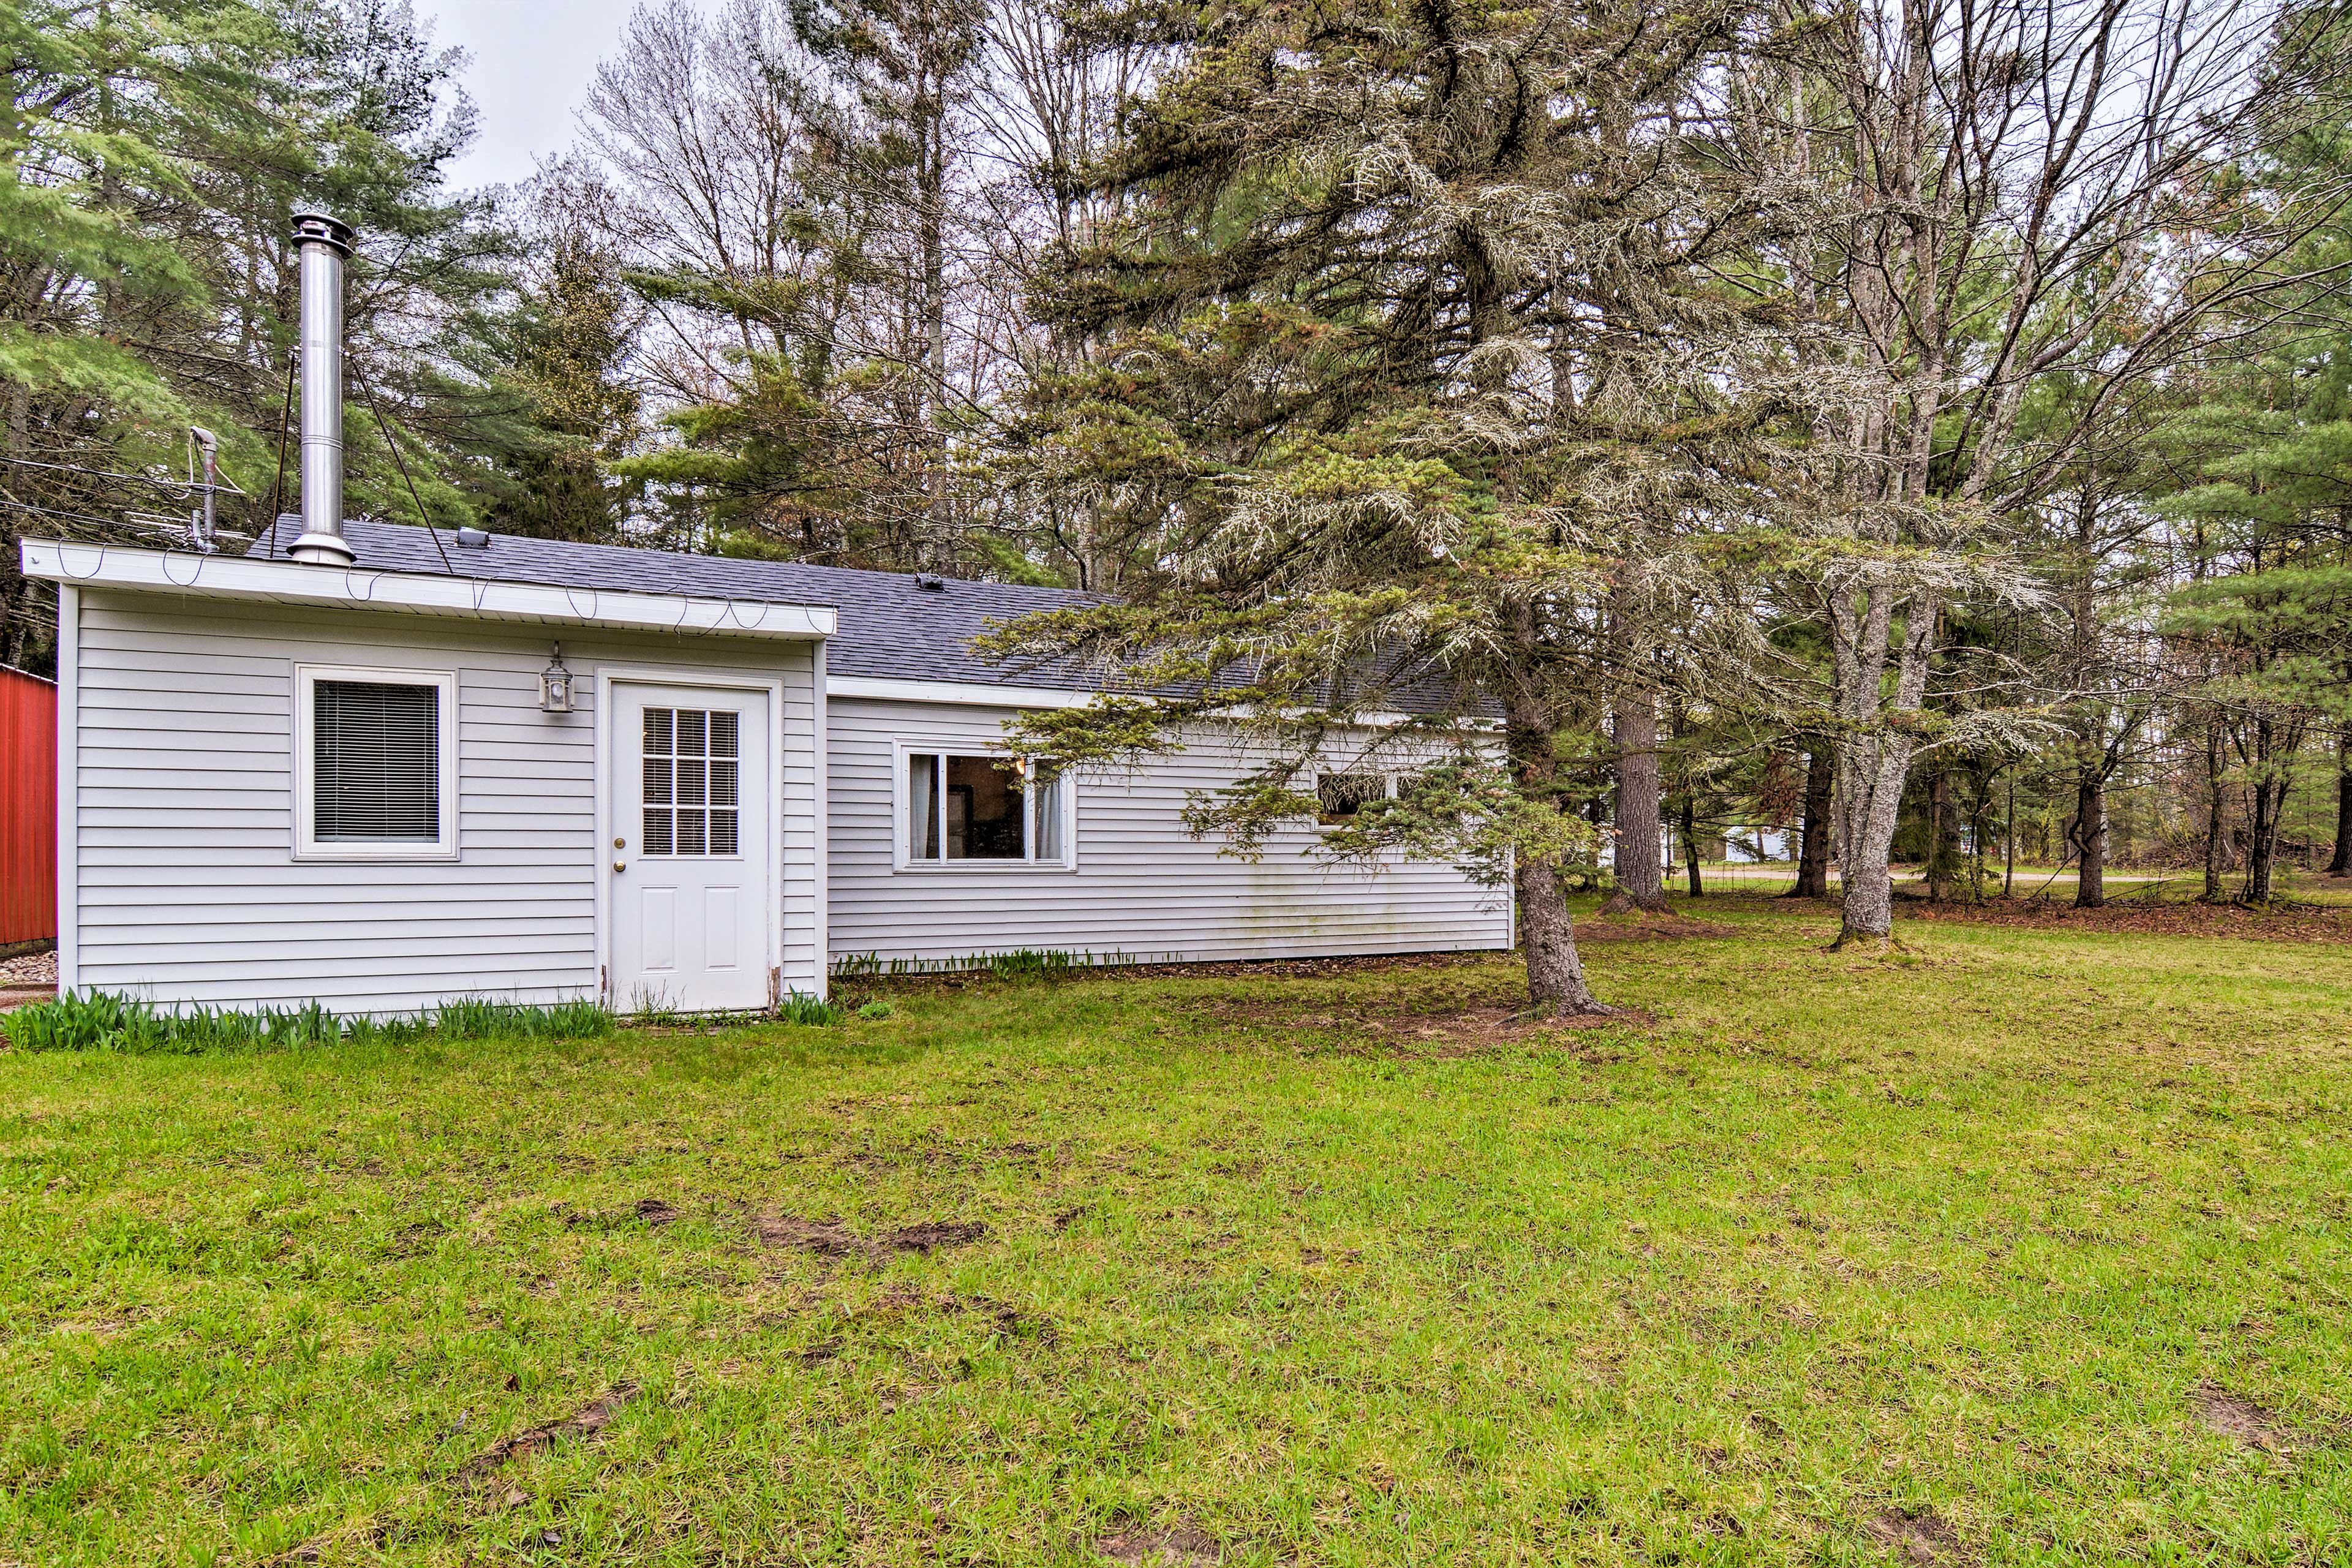 Find a large yard, Lake Otsego nearby, and more at this vacation rental.